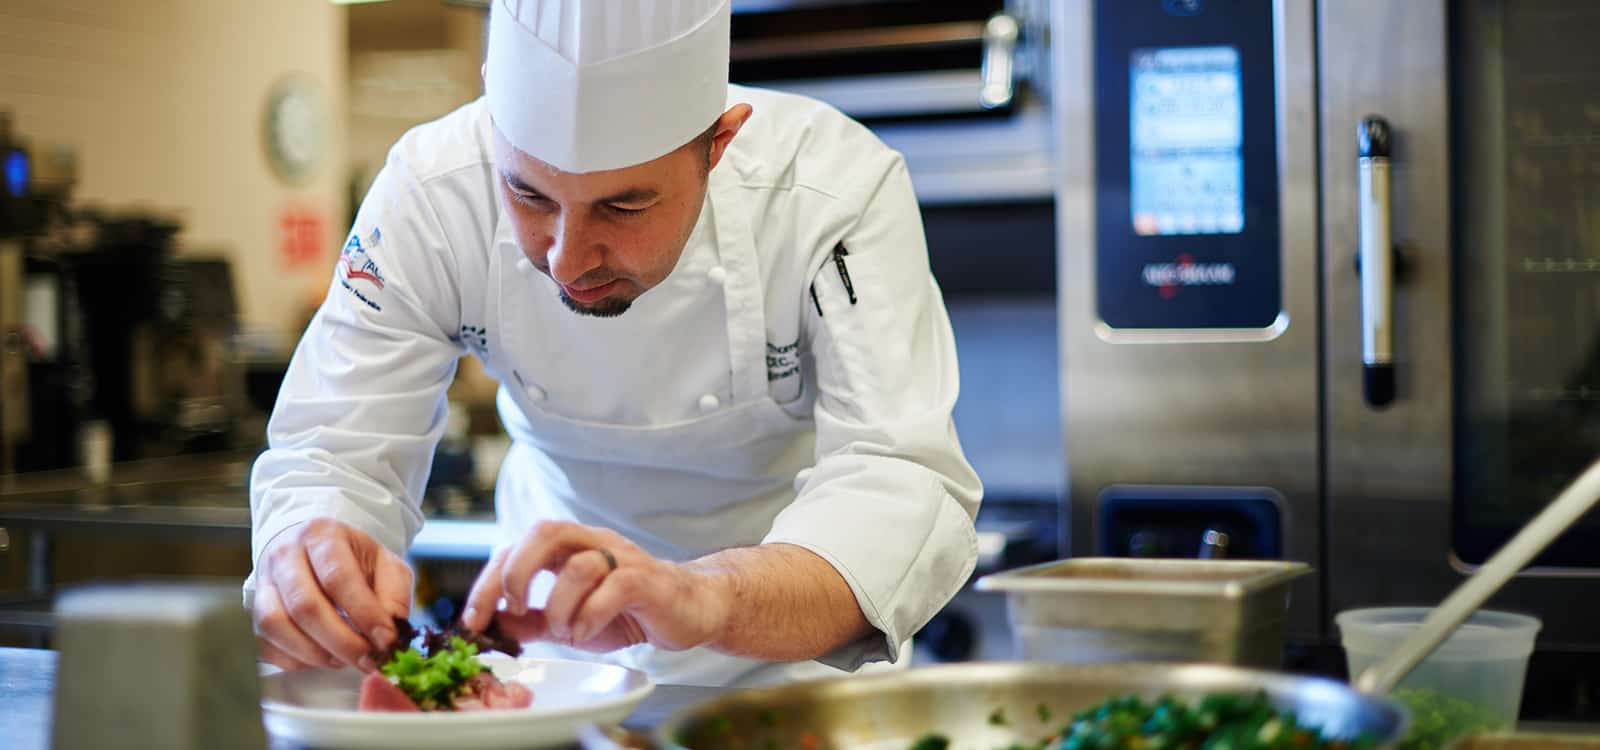 Harvest Table Culinary Group | College Food Service Provider